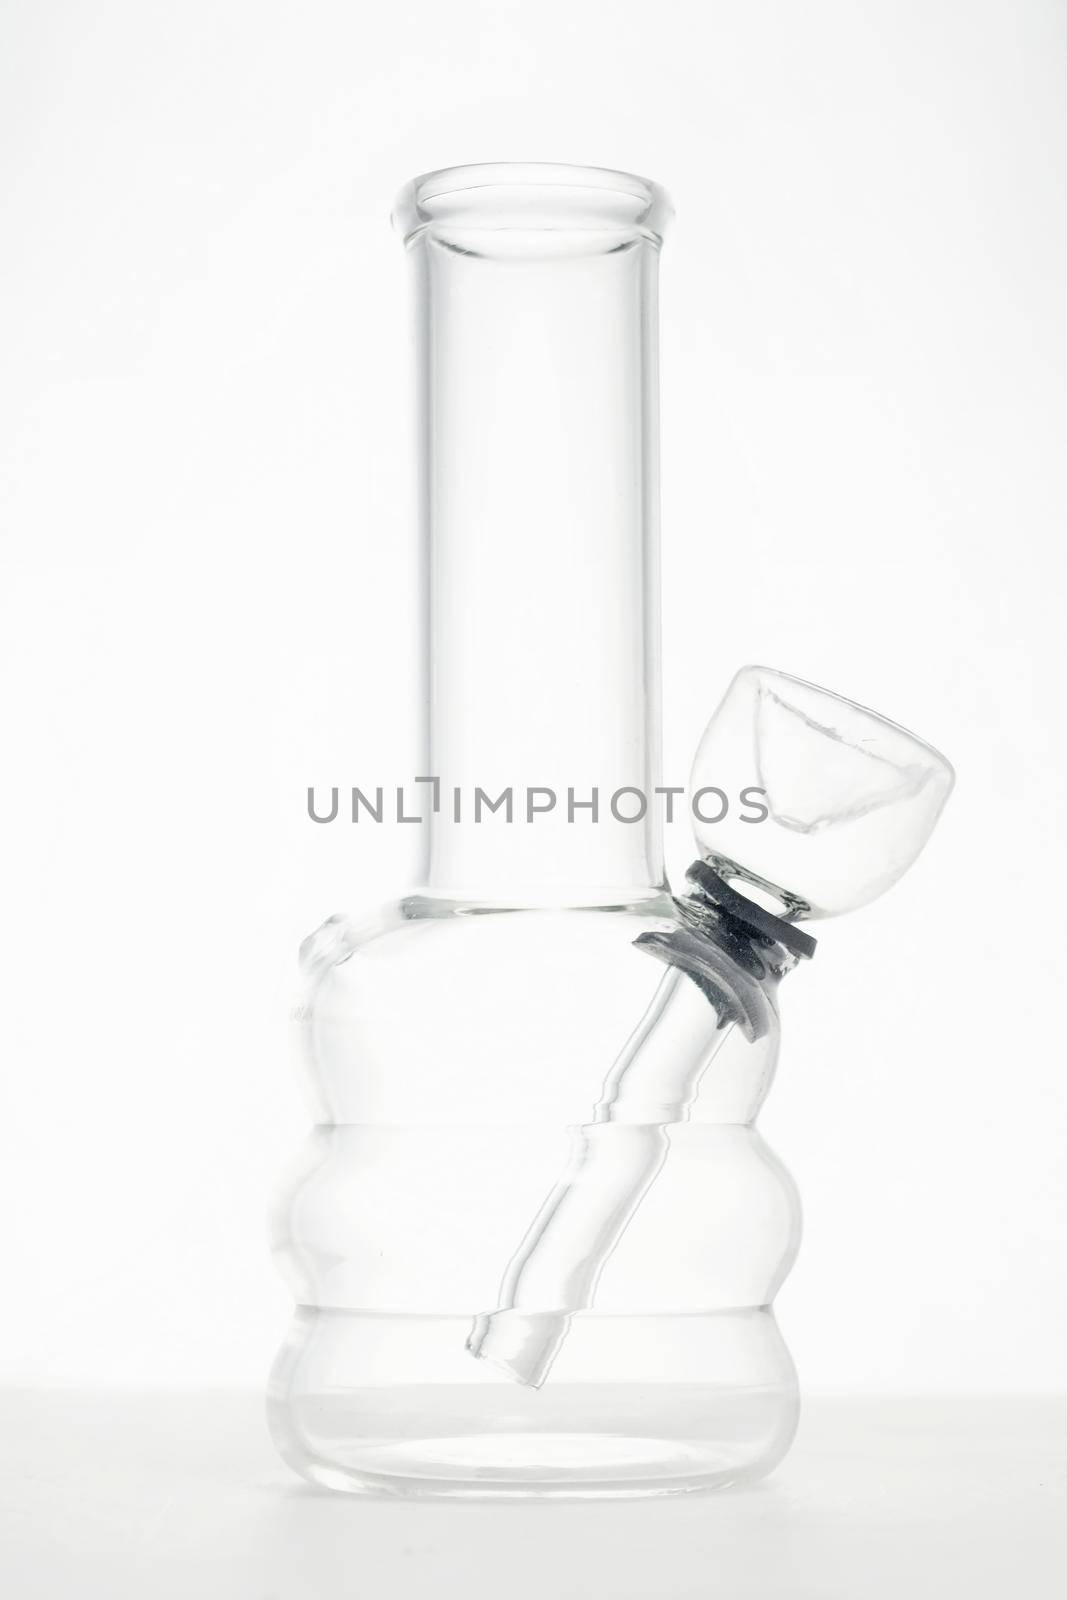 clear glass water bong pipe for smoking medical marijuana or cannabis in white studio background